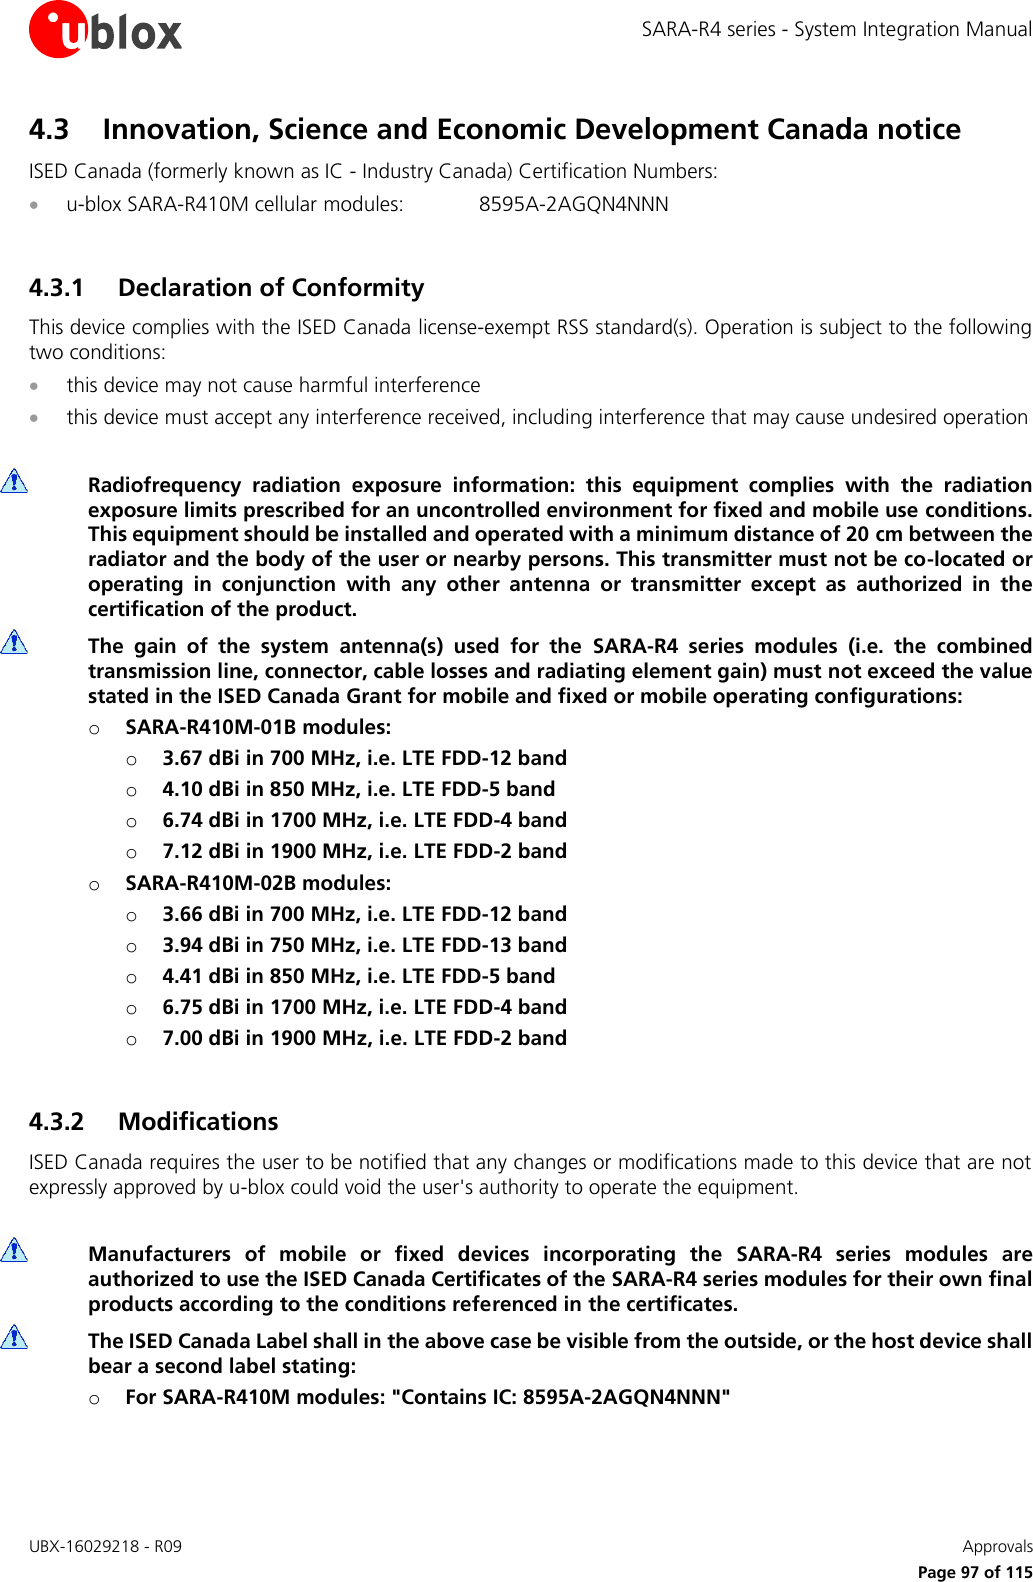 SARA-R4 series - System Integration Manual UBX-16029218 - R09    Approvals     Page 97 of 115 4.3 Innovation, Science and Economic Development Canada notice ISED Canada (formerly known as IC - Industry Canada) Certification Numbers:  u-blox SARA-R410M cellular modules:  8595A-2AGQN4NNN  4.3.1 Declaration of Conformity This device complies with the ISED Canada license-exempt RSS standard(s). Operation is subject to the following two conditions:  this device may not cause harmful interference  this device must accept any interference received, including interference that may cause undesired operation   Radiofrequency  radiation  exposure  information:  this  equipment  complies  with  the  radiation exposure limits prescribed for an uncontrolled environment for fixed and mobile use conditions. This equipment should be installed and operated with a minimum distance of 20 cm between the radiator and the body of the user or nearby persons. This transmitter must not be co-located or operating  in  conjunction  with  any  other  antenna  or  transmitter  except  as  authorized  in  the certification of the product.  The  gain  of  the  system  antenna(s)  used  for  the  SARA-R4  series  modules  (i.e.  the  combined transmission line, connector, cable losses and radiating element gain) must not exceed the value stated in the ISED Canada Grant for mobile and fixed or mobile operating configurations: o SARA-R410M-01B modules: o 3.67 dBi in 700 MHz, i.e. LTE FDD-12 band o 4.10 dBi in 850 MHz, i.e. LTE FDD-5 band  o 6.74 dBi in 1700 MHz, i.e. LTE FDD-4 band o 7.12 dBi in 1900 MHz, i.e. LTE FDD-2 band o SARA-R410M-02B modules: o 3.66 dBi in 700 MHz, i.e. LTE FDD-12 band o 3.94 dBi in 750 MHz, i.e. LTE FDD-13 band o 4.41 dBi in 850 MHz, i.e. LTE FDD-5 band o 6.75 dBi in 1700 MHz, i.e. LTE FDD-4 band o 7.00 dBi in 1900 MHz, i.e. LTE FDD-2 band  4.3.2 Modifications ISED Canada requires the user to be notified that any changes or modifications made to this device that are not expressly approved by u-blox could void the user&apos;s authority to operate the equipment.   Manufacturers  of  mobile  or  fixed  devices  incorporating  the  SARA-R4  series  modules  are authorized to use the ISED Canada Certificates of the SARA-R4 series modules for their own final products according to the conditions referenced in the certificates.  The ISED Canada Label shall in the above case be visible from the outside, or the host device shall bear a second label stating: o For SARA-R410M modules: &quot;Contains IC: 8595A-2AGQN4NNN&quot;  